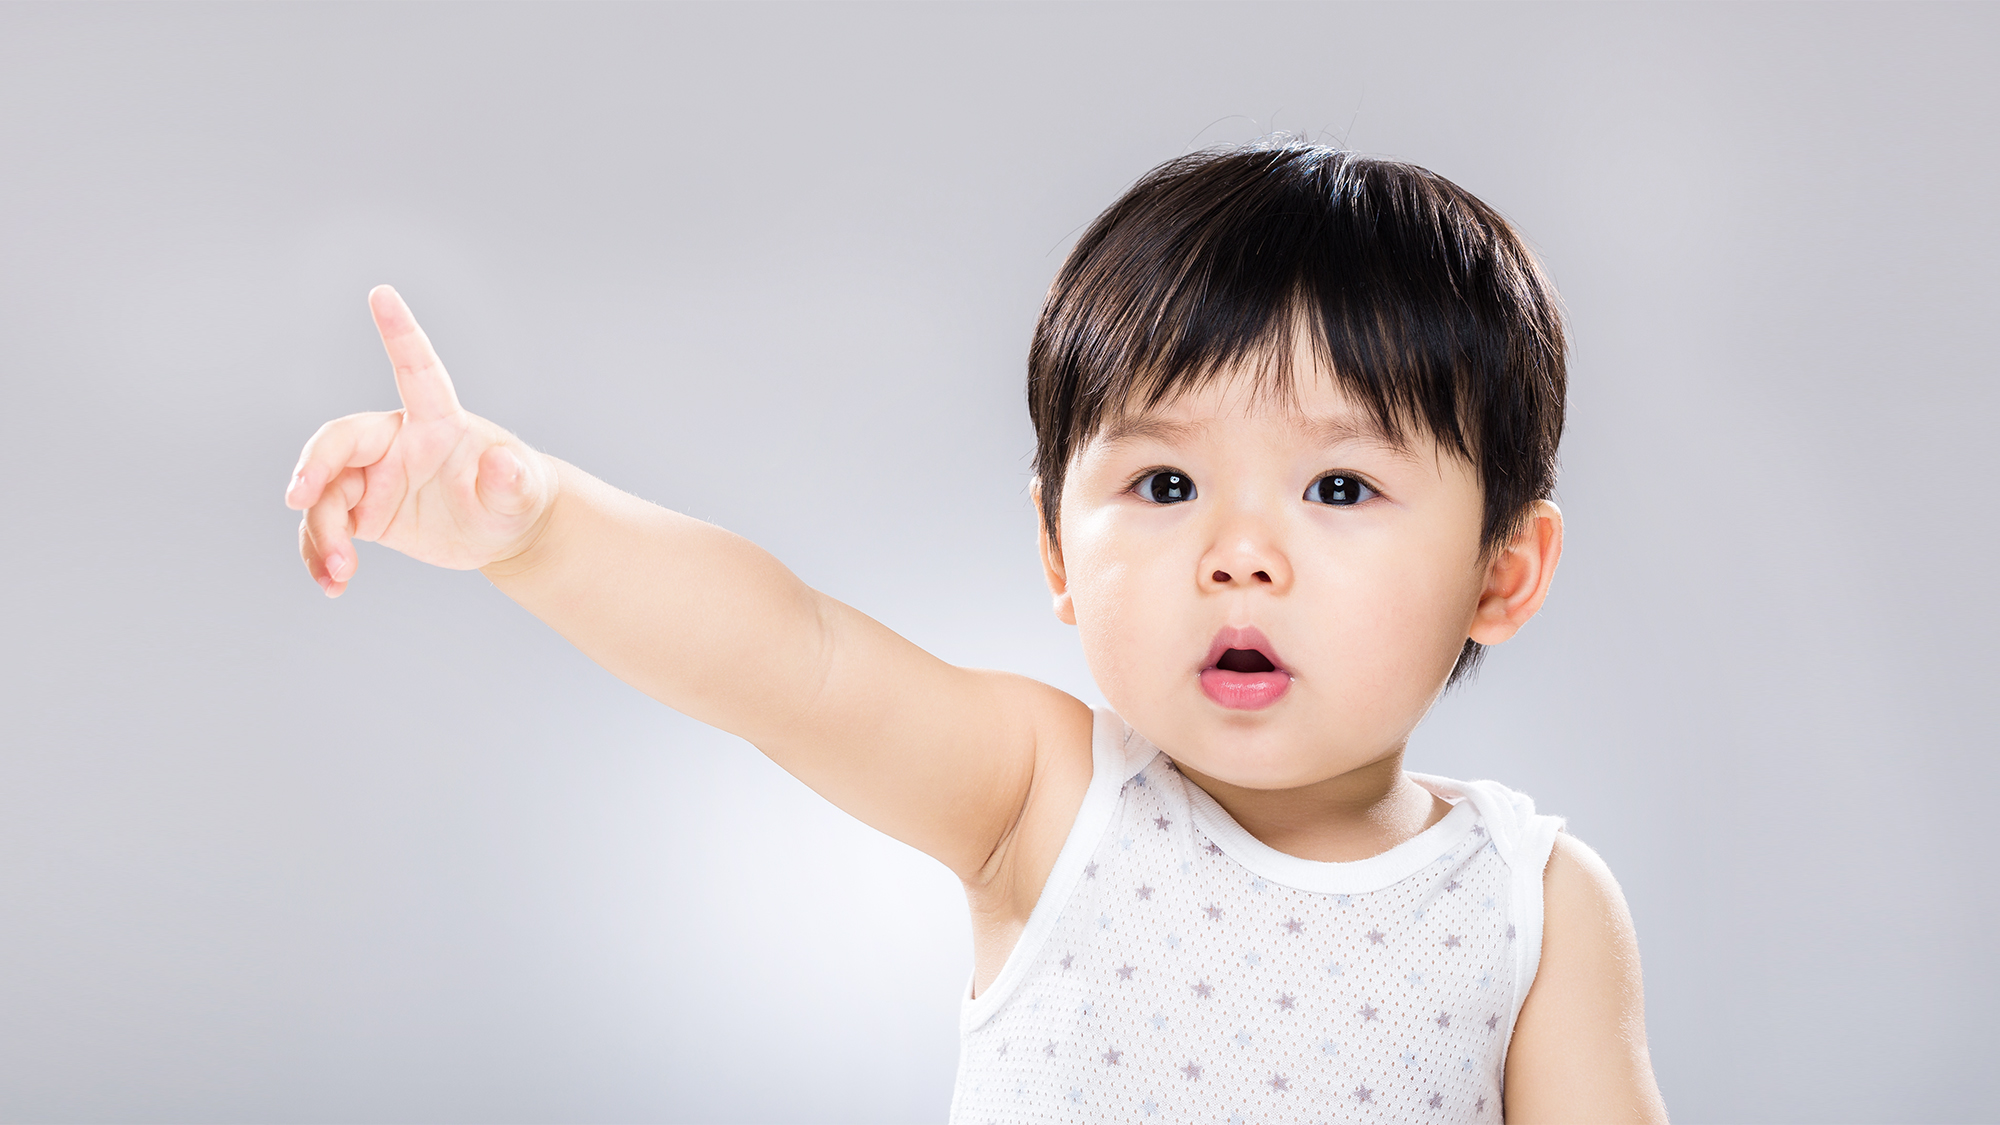 Toddler sign language - repetition is key